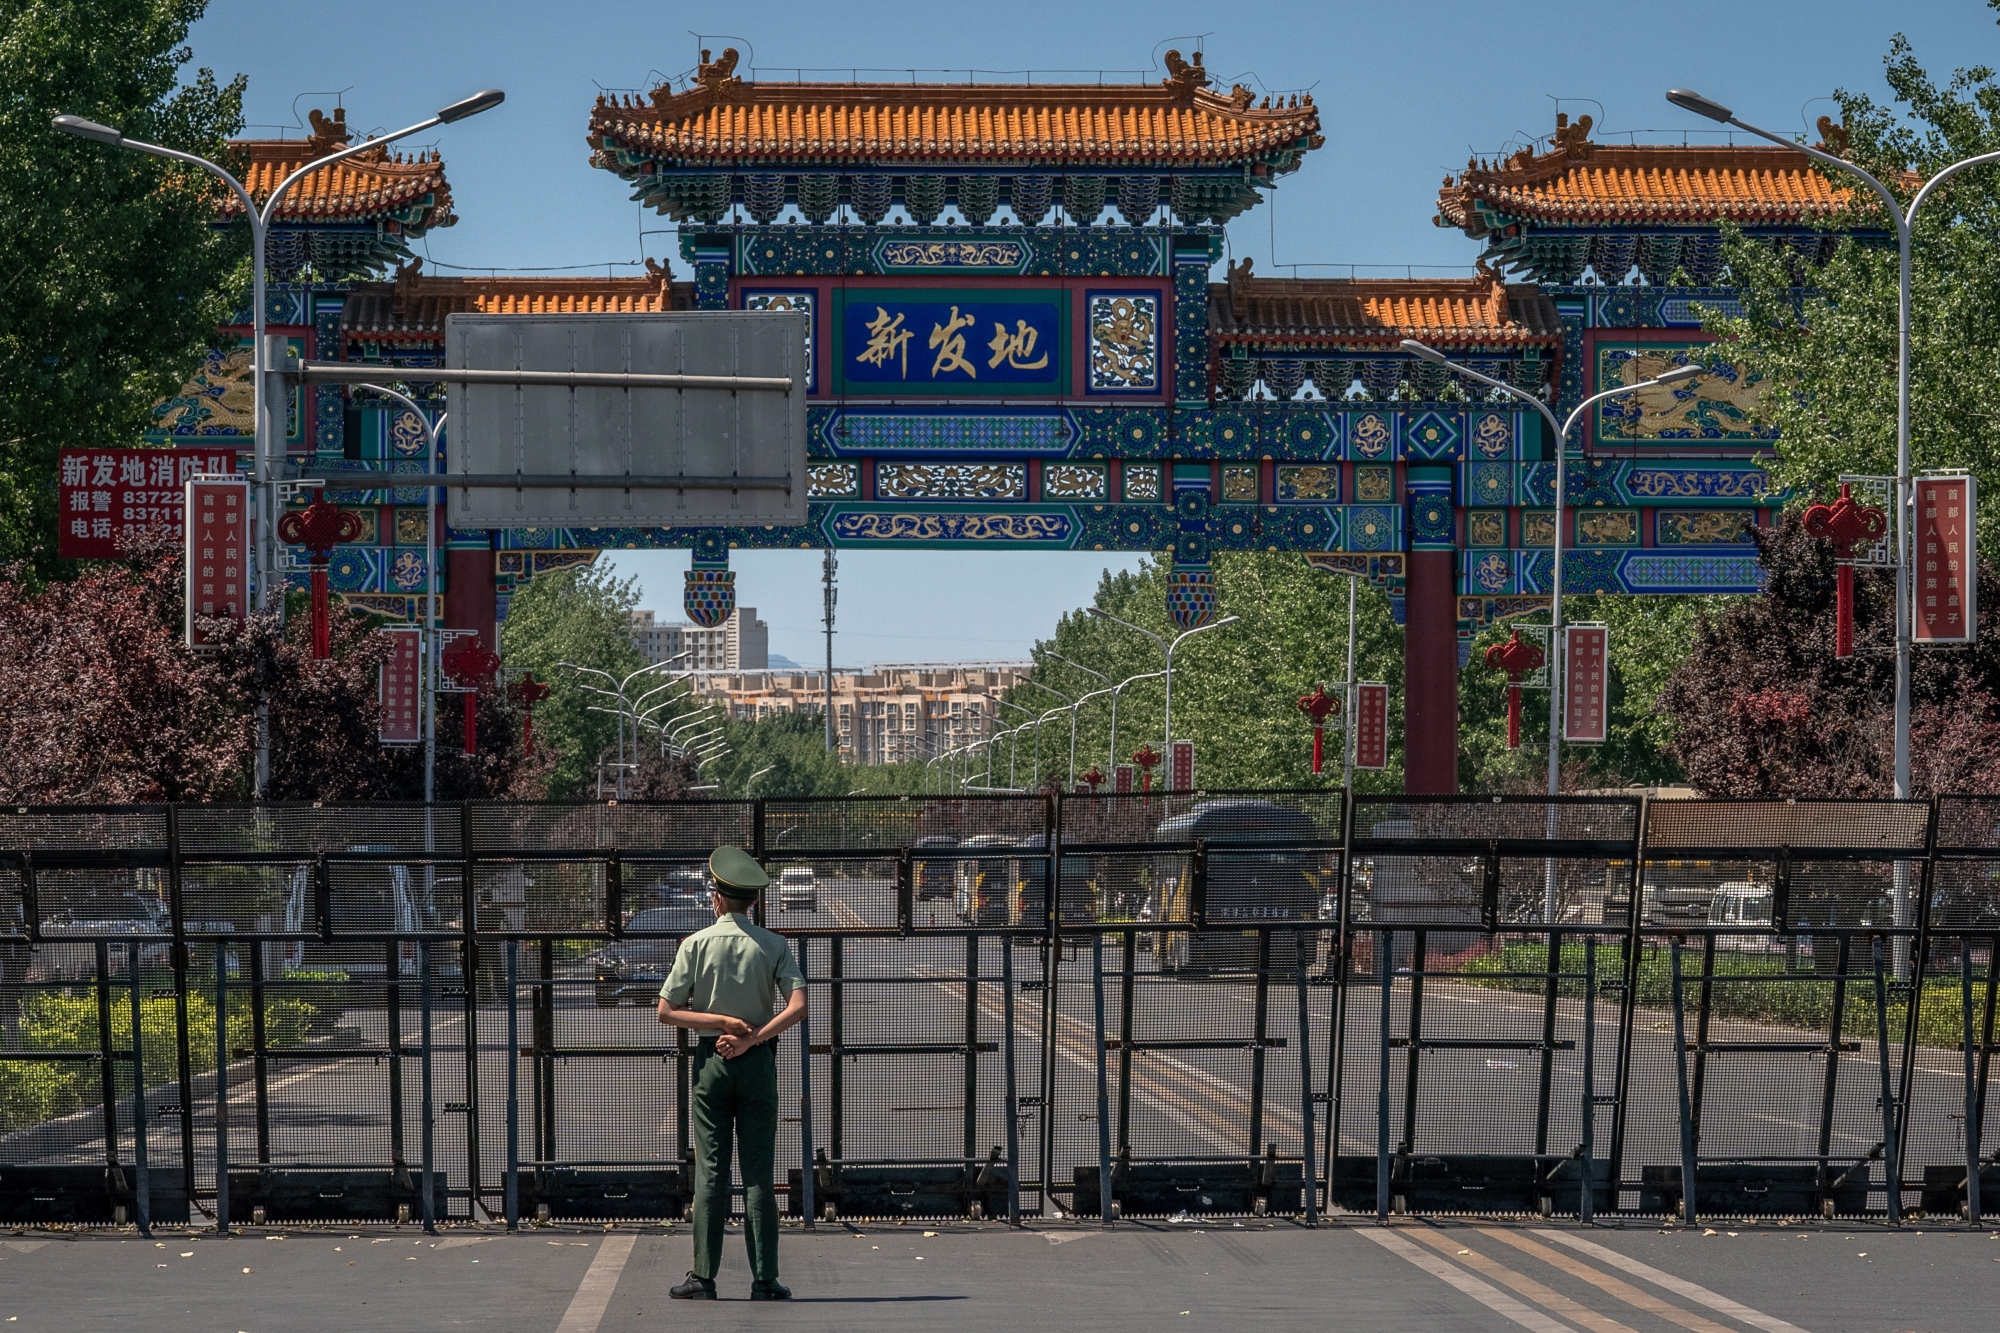 epa08484450 A paramilitary police officer stands guard at the entrance to the closed Xinfadi market, in Fengtai district, Beijing, China, 14 June 2020. One of Beijing's largest markets, Xinfadi in Fengtai district, was shut down on 13 June, and the district placed under lockdown following the confirmation of new domestic coronavirus cases which were linked to the Xinfadi market.  EPA/ROMAN PILIPEY
ArcInfo